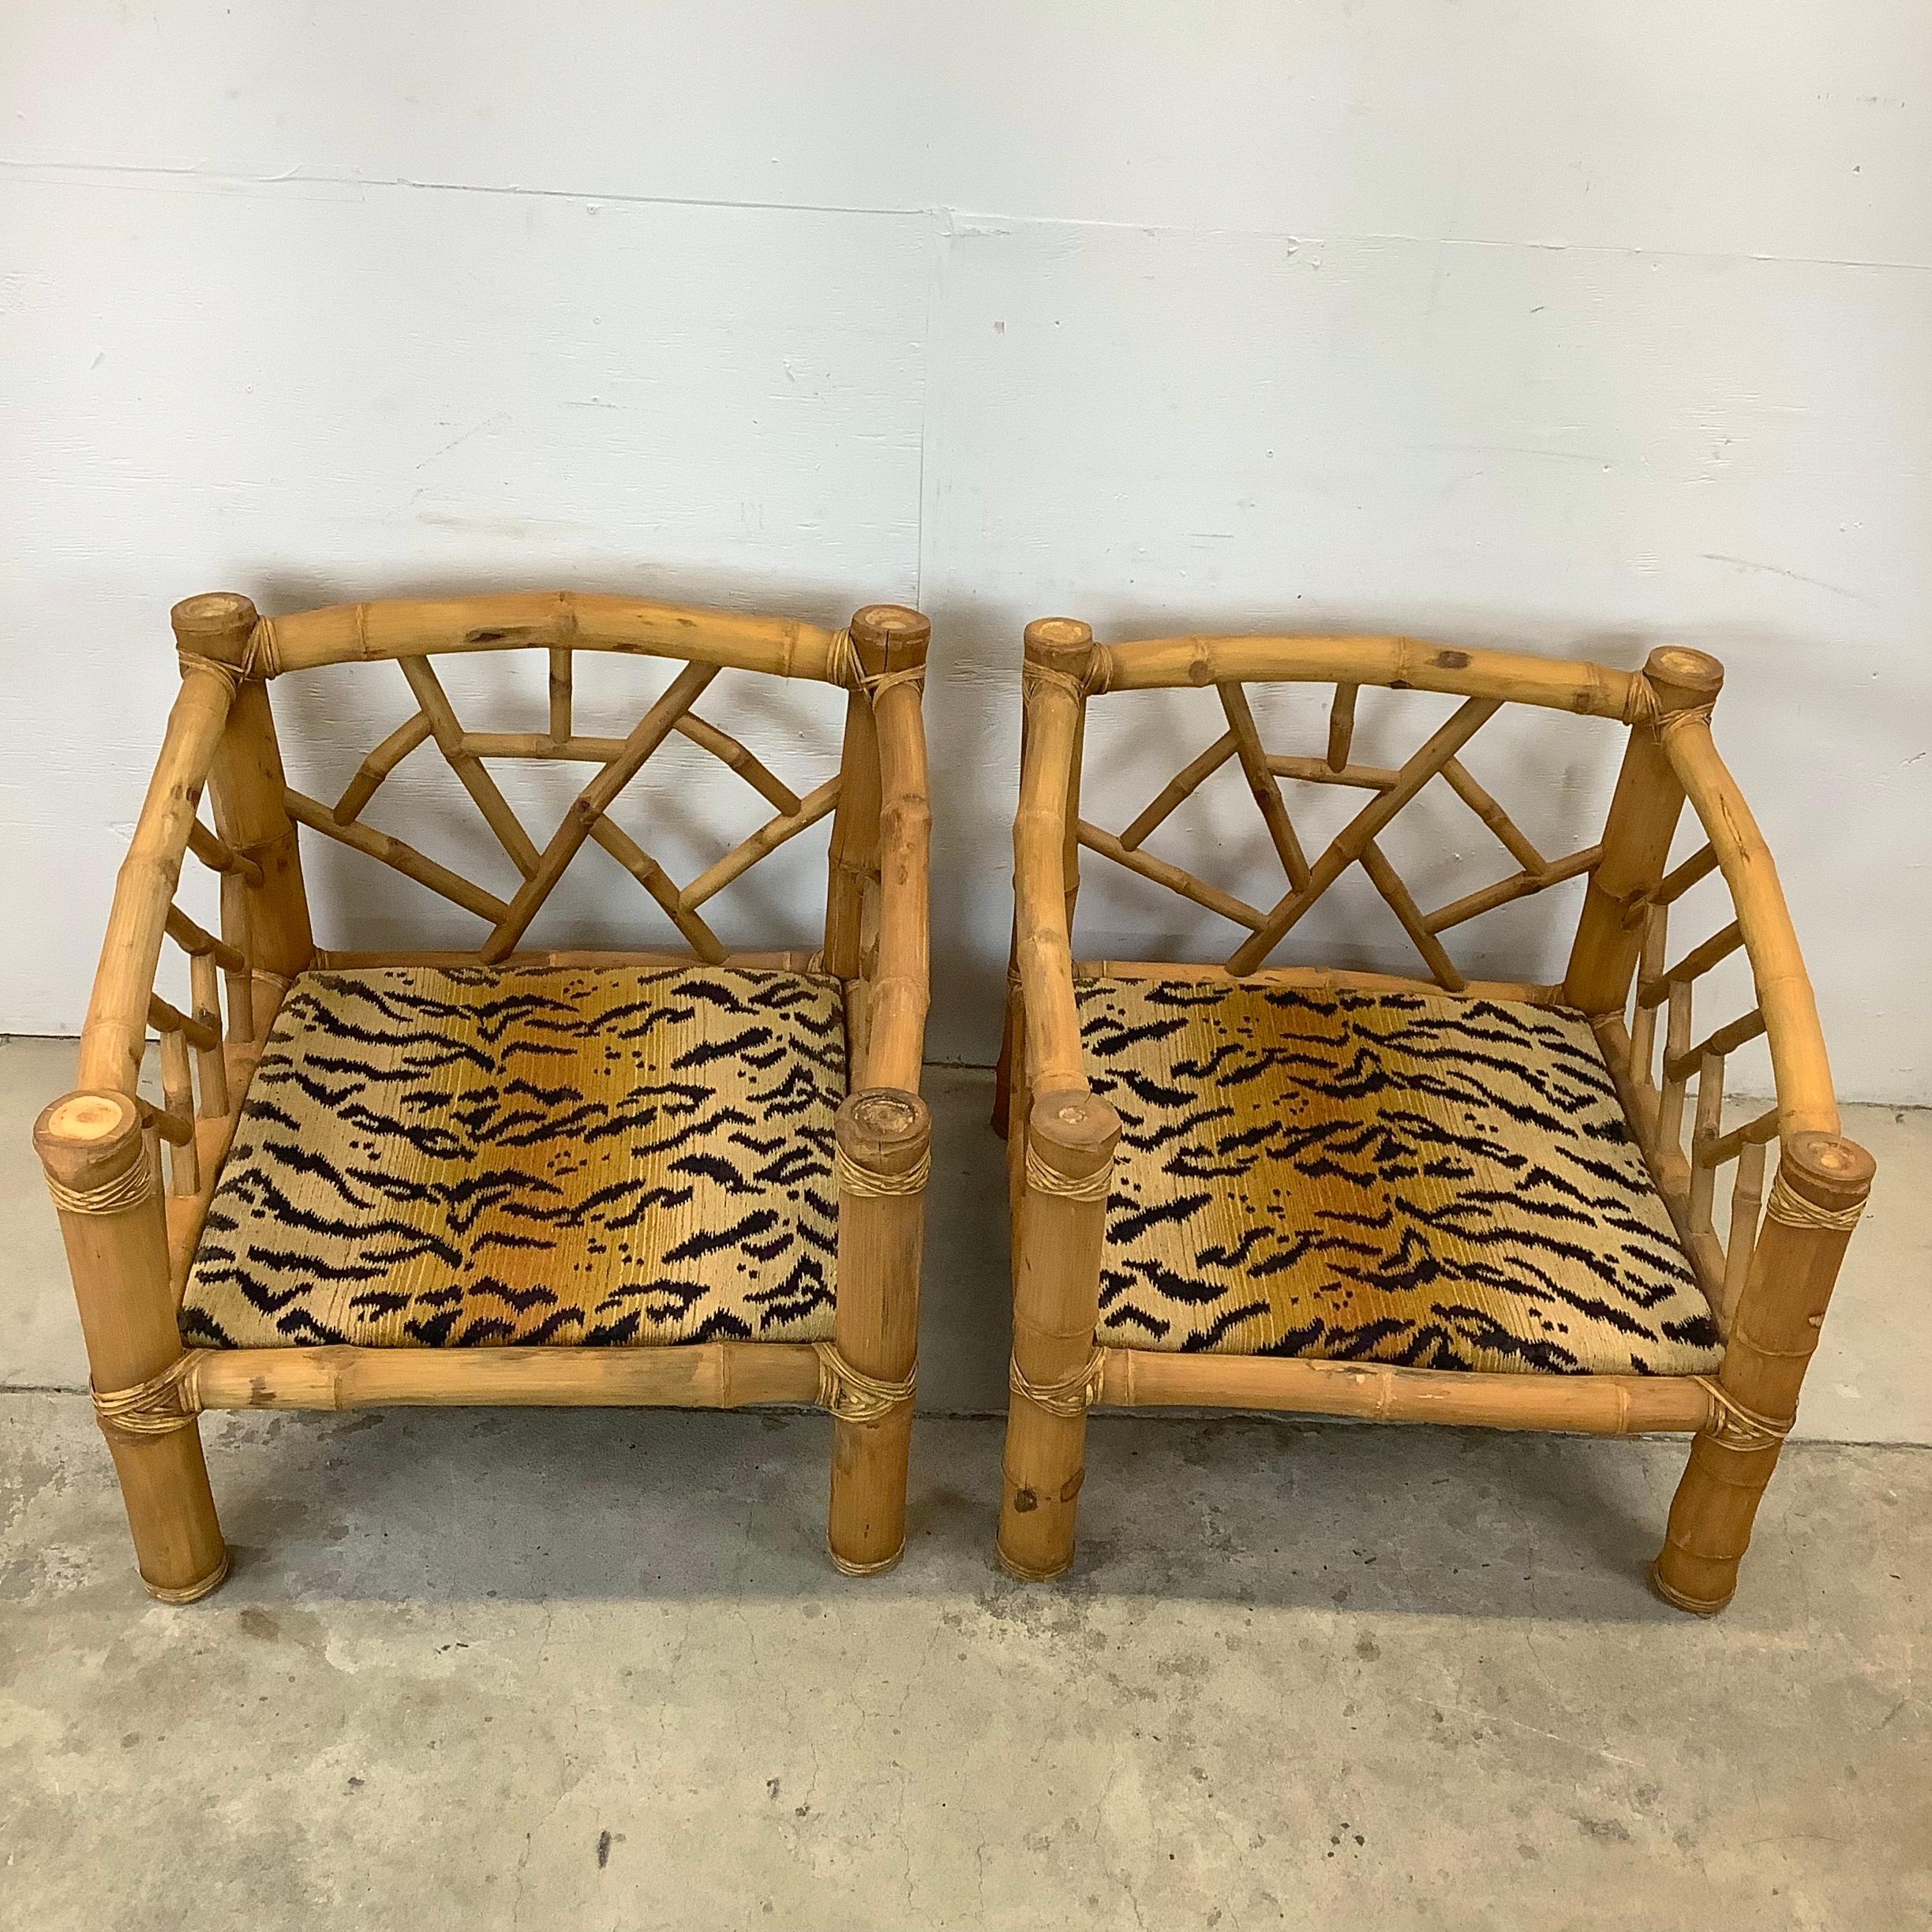 Pair Vintage Bamboo Armchairs & Ottoman in Tiger Print For Sale 3